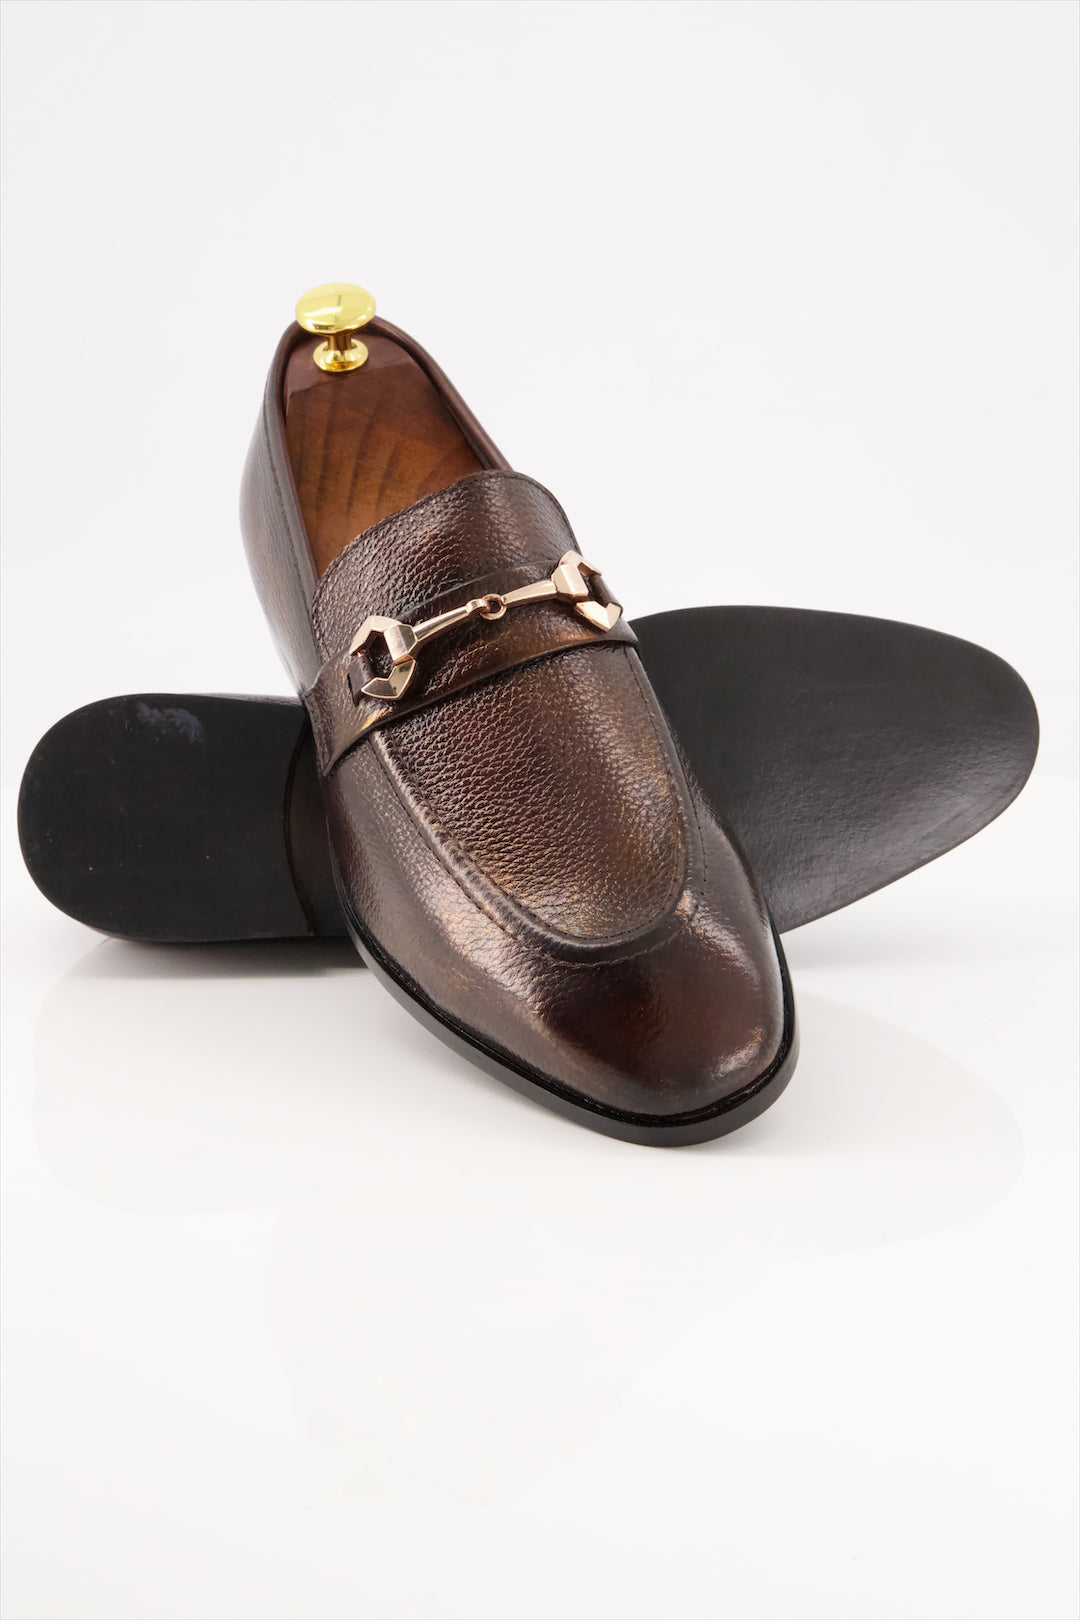 Monarch Buckle Loafers - Premium Leather Dress Shoes